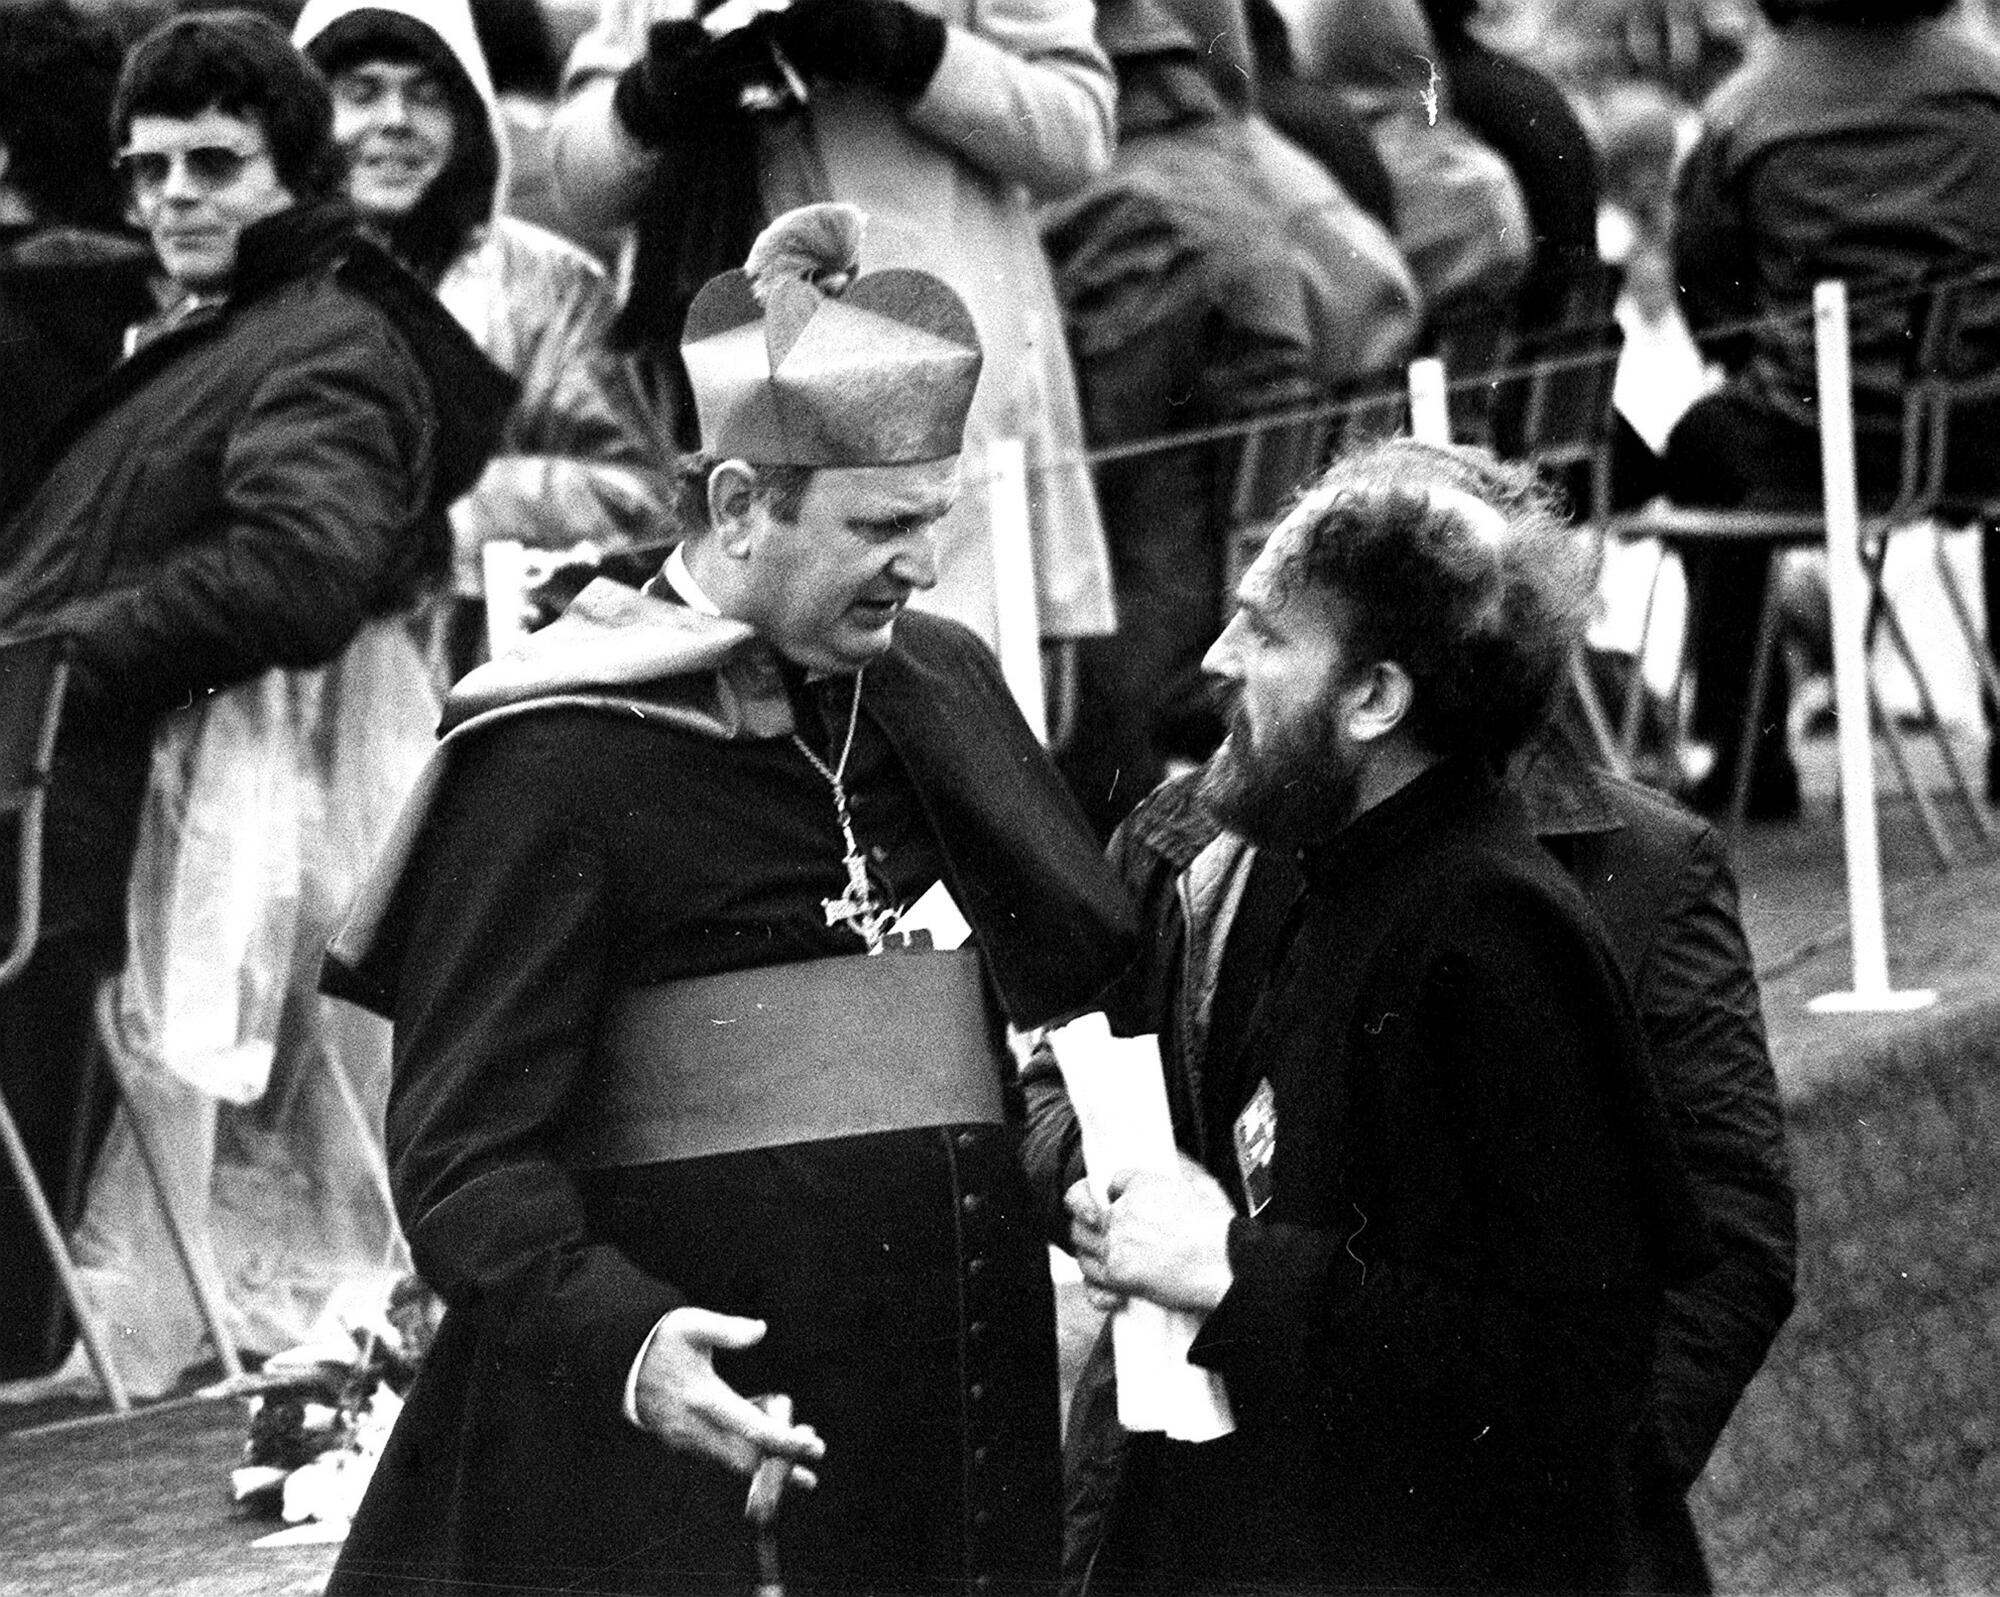 Bishop Eamon Casey speaks with a priest at a youth Mass in 1979.